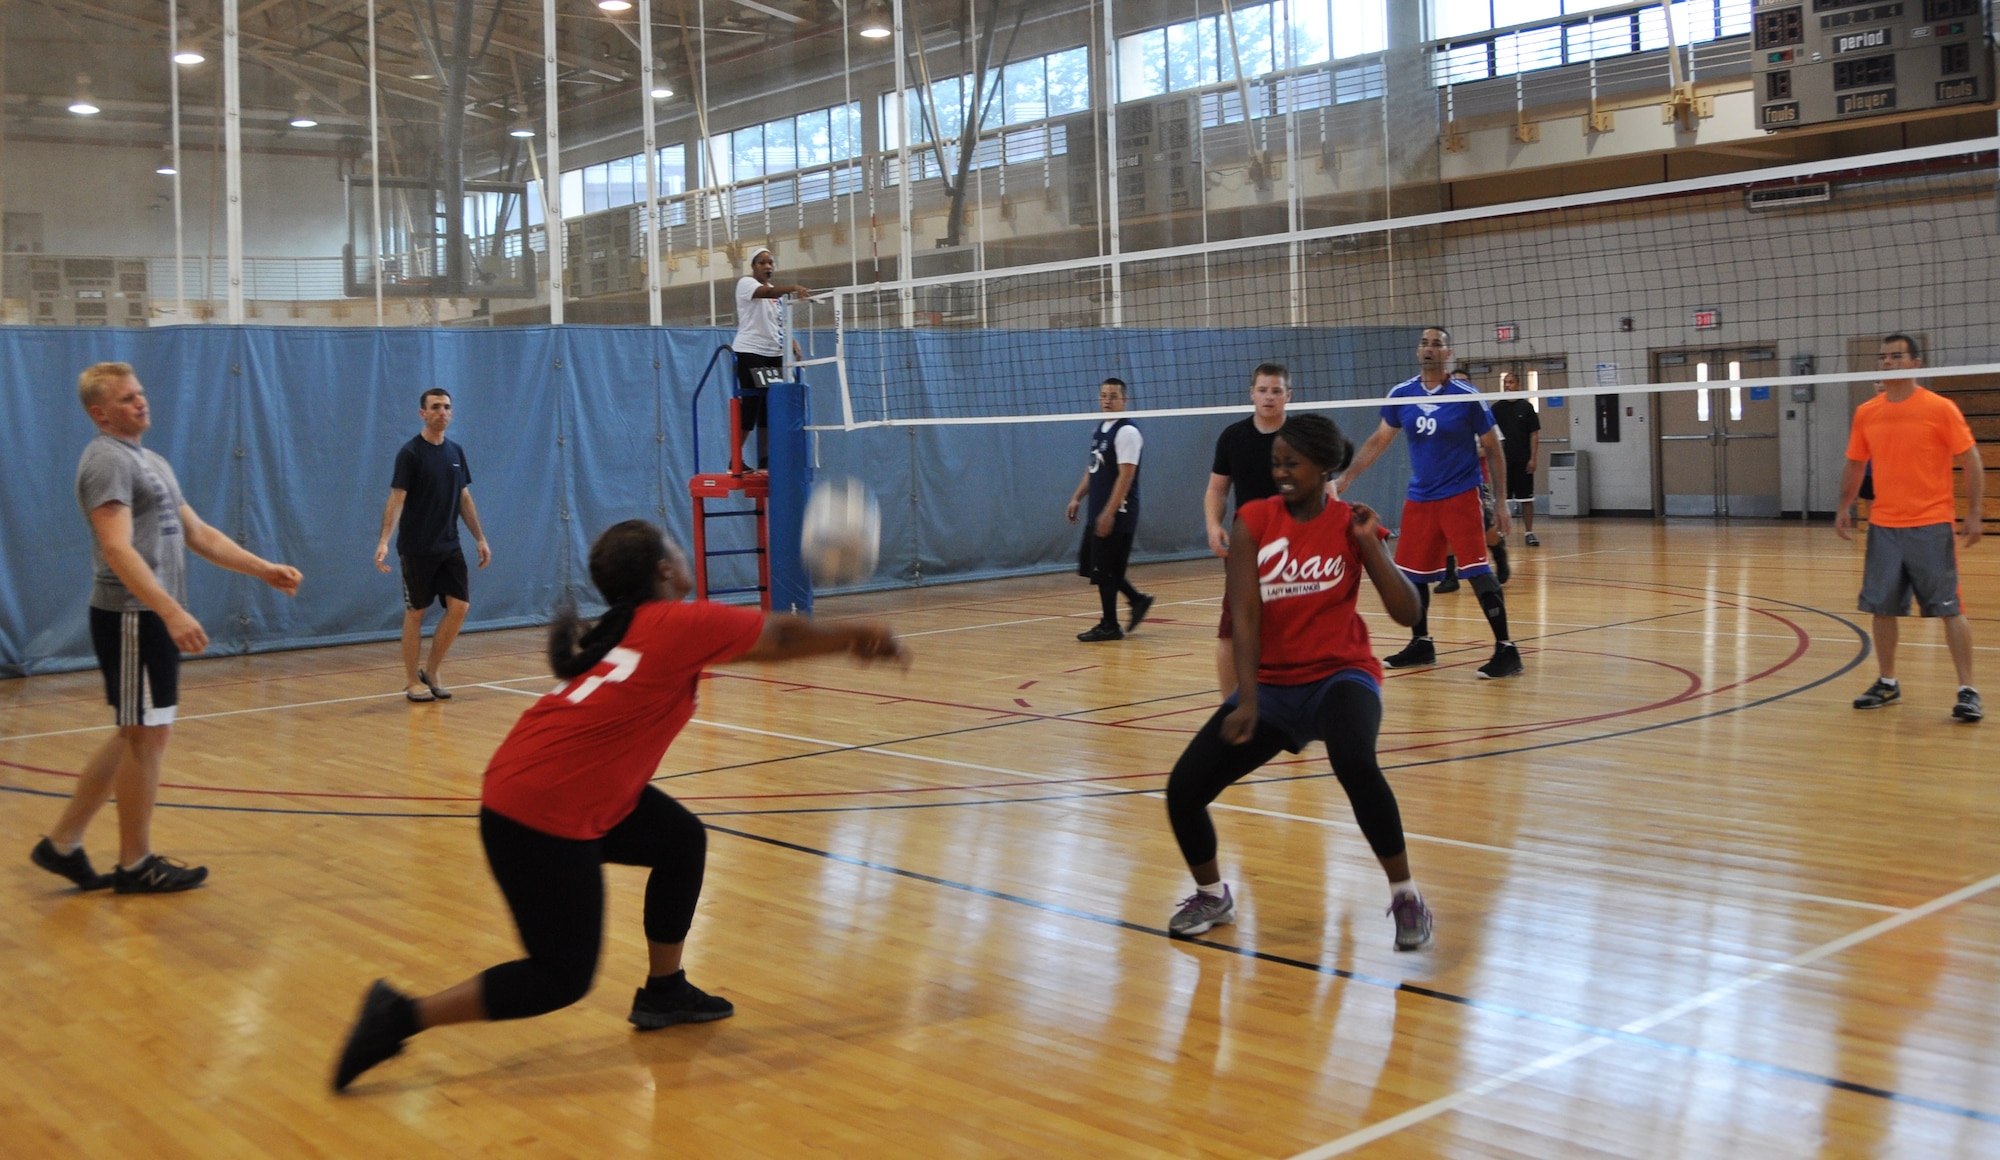 Service members from Osan Air Base and U.S. Army Garrison Yongsan participate in a volleyball tournament during the 2012 Sports Day event at Osan’s fitness center, Sept. 28, 2012. The event was hosted by the Osan Junior Enlisted and the Air Force Sergeants Association, and involved more than 250 participants and volunteers. (U.S. Air Force photo/Staff Sgt. Stefanie Torres) 